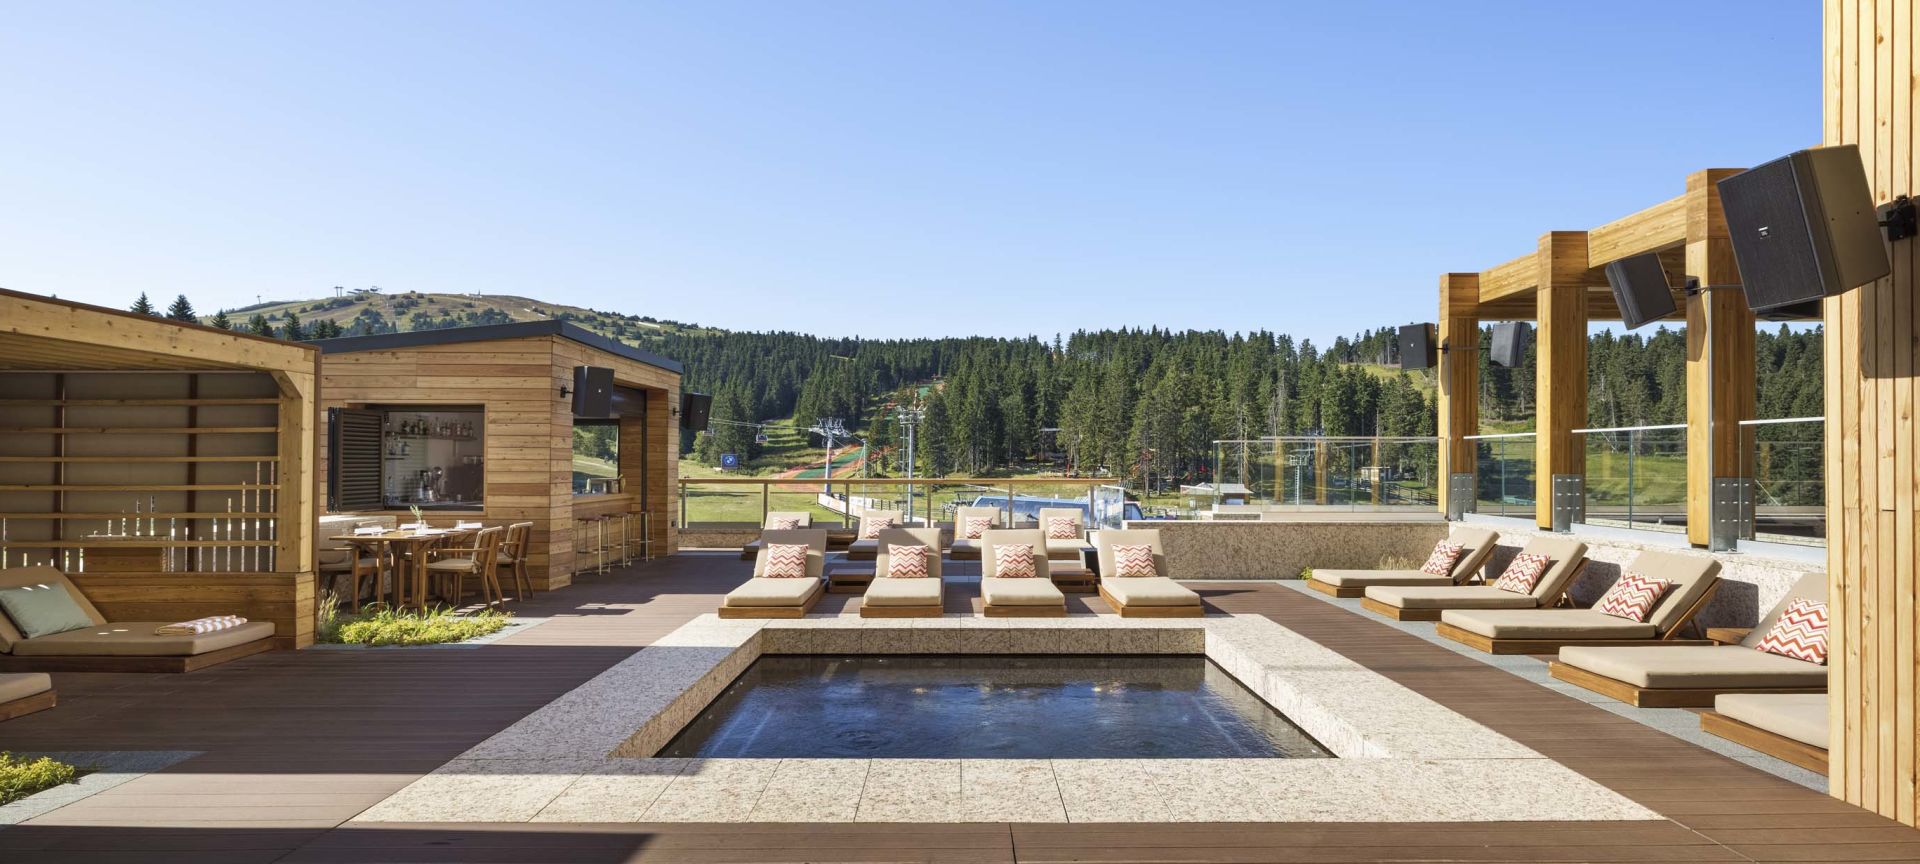 Outdoor whirlpool terrace with seating and mountain views